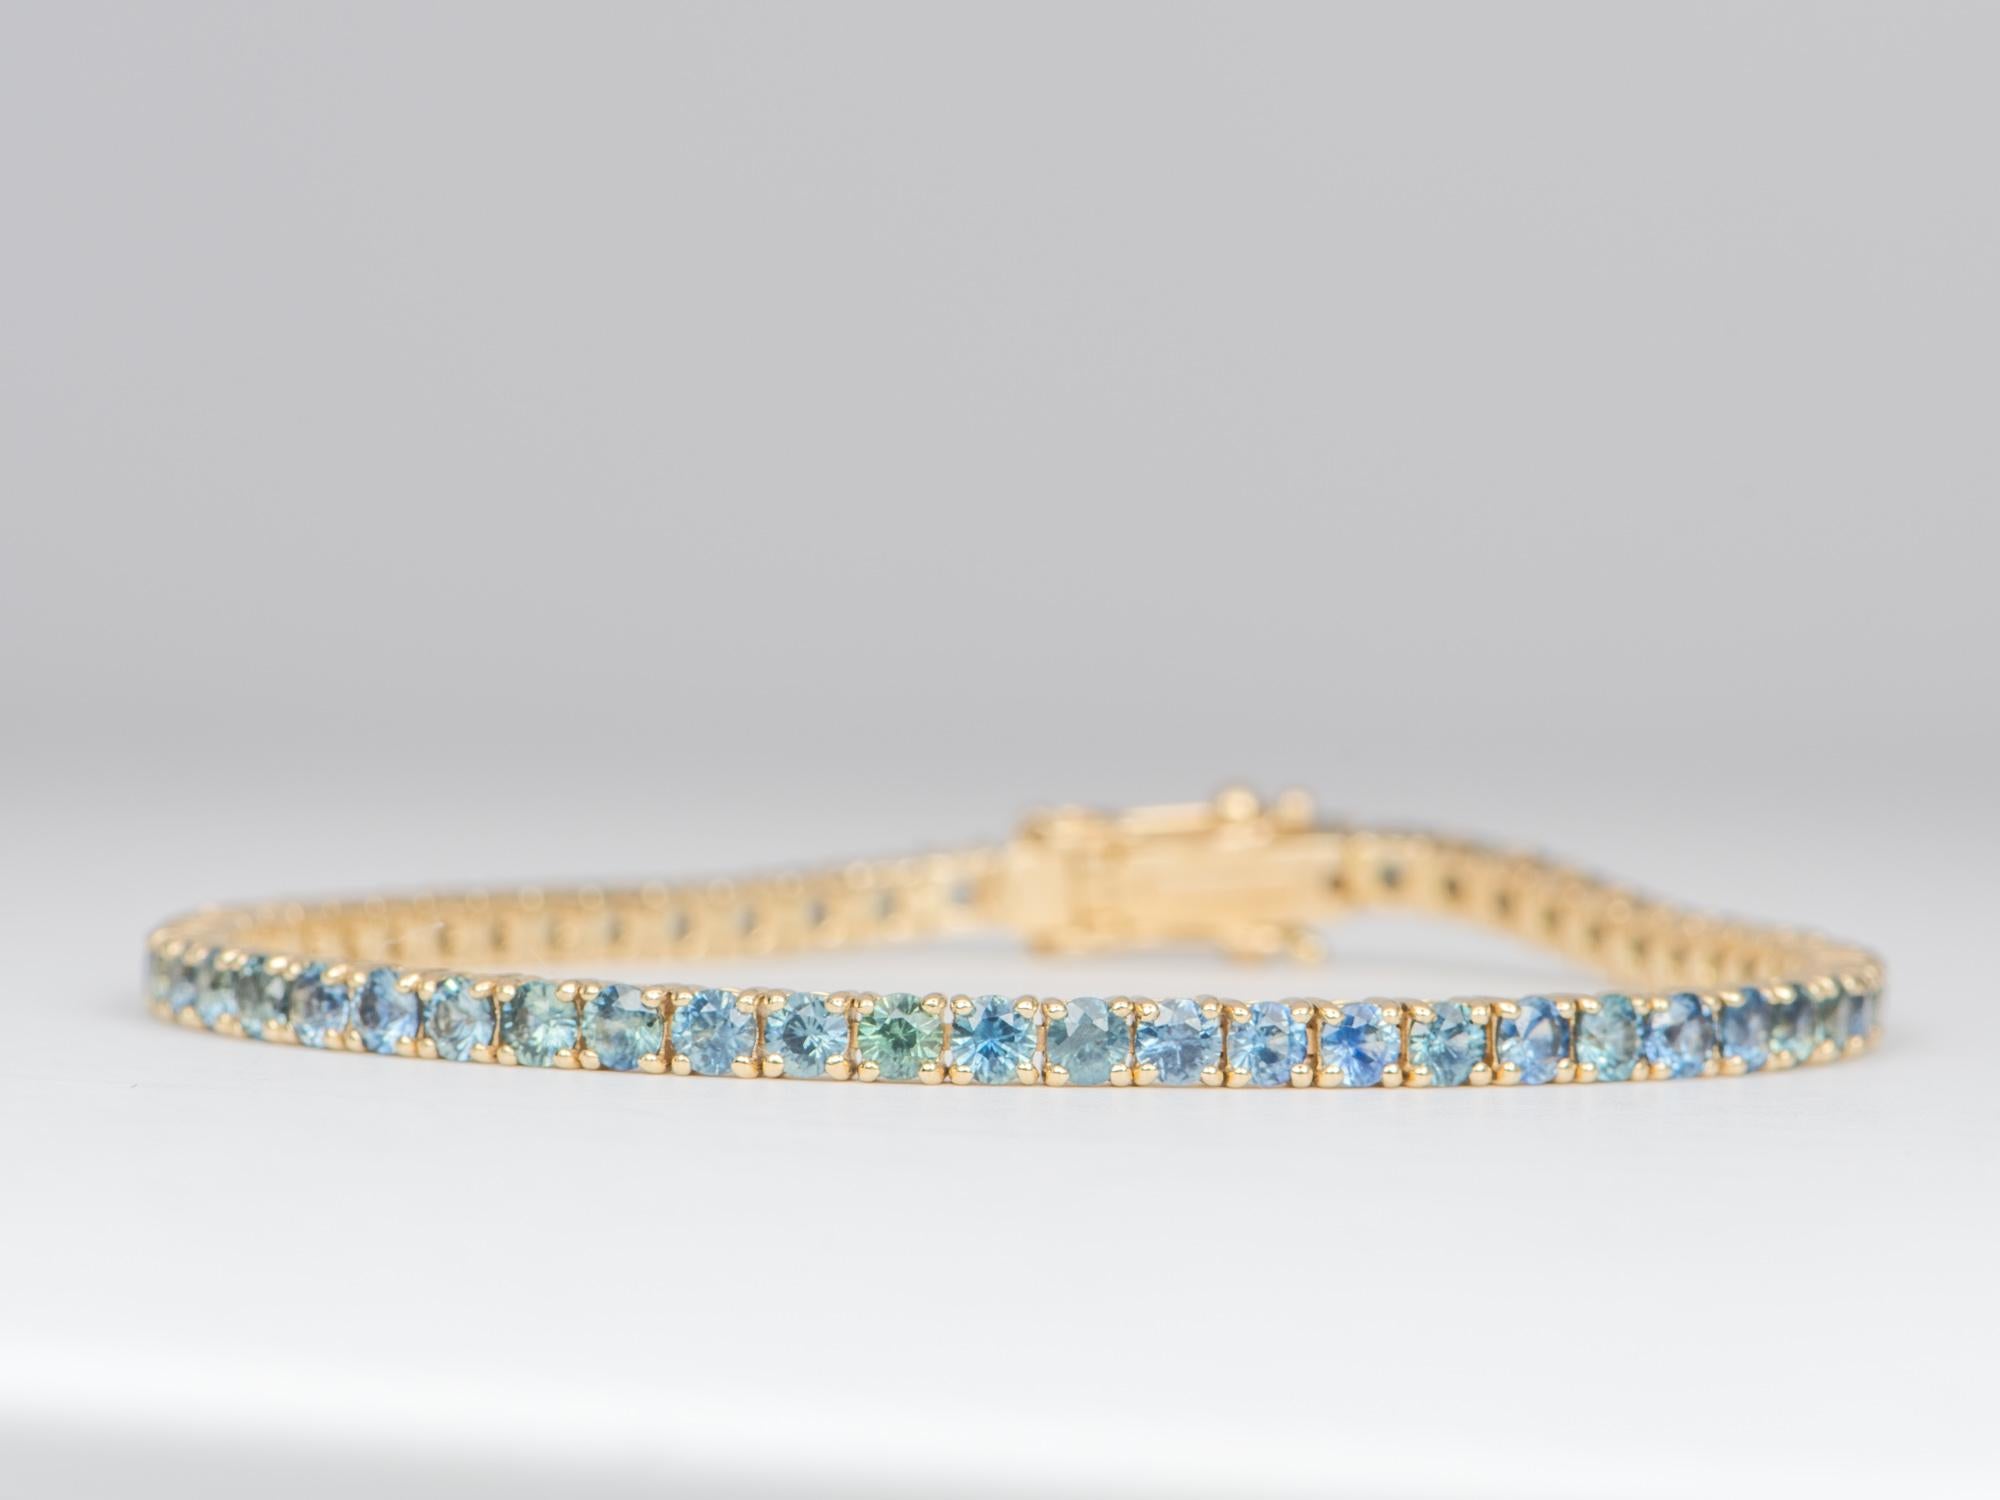 ♥♥ You are buying the Yellow Gold bracelet seen in the photos.

♥ Featuring over 11 grams of solid gold and 8.85ct worth of Montana sapphires, this beautiful bracelet is lined with ombré-colored Montana sapphires ranging from light blue to saturated